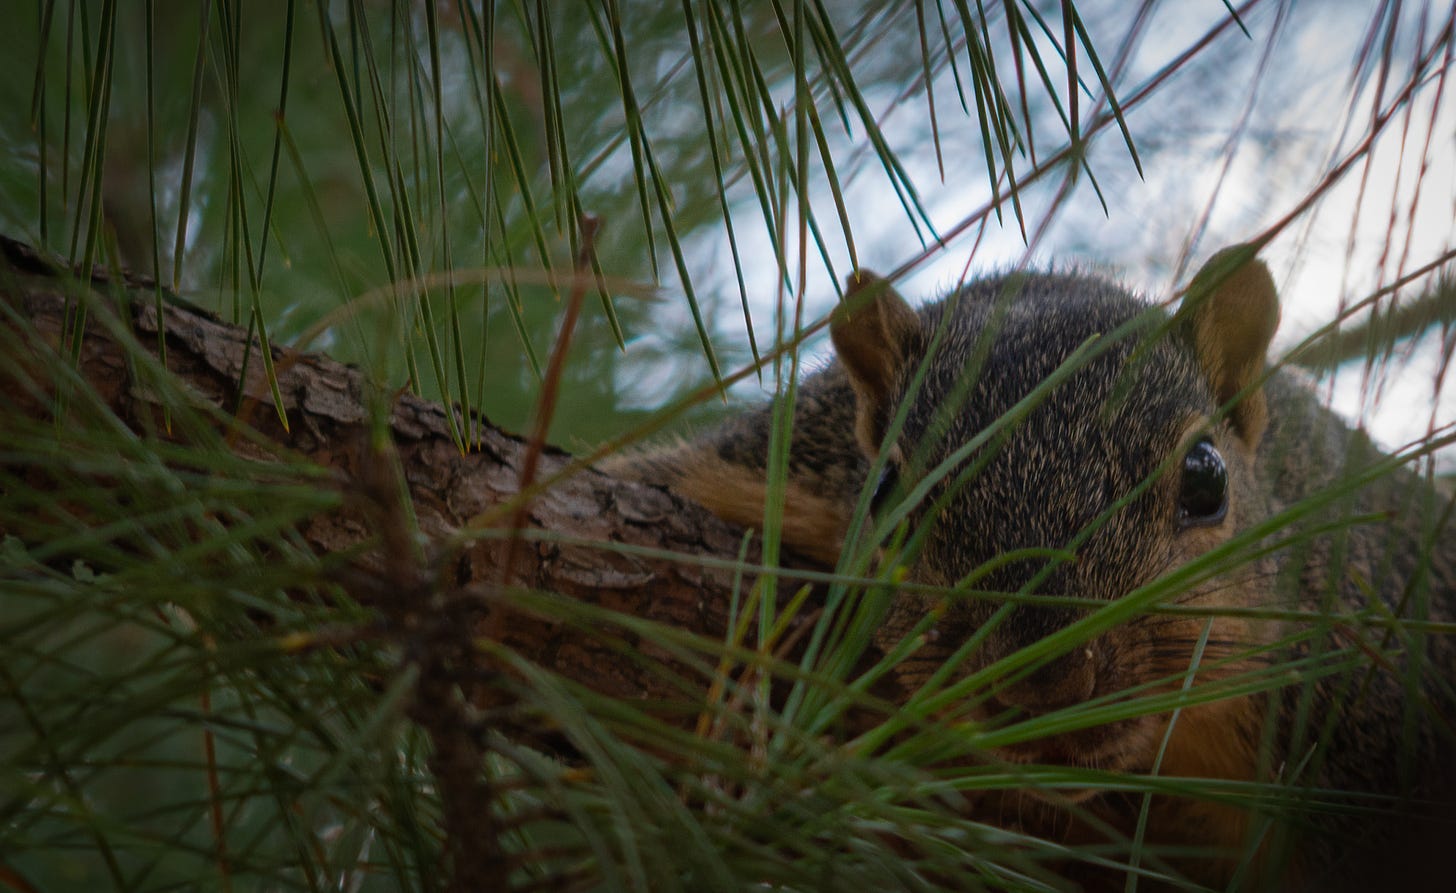 A close up of a squirel sitting on a limb in a pine tree